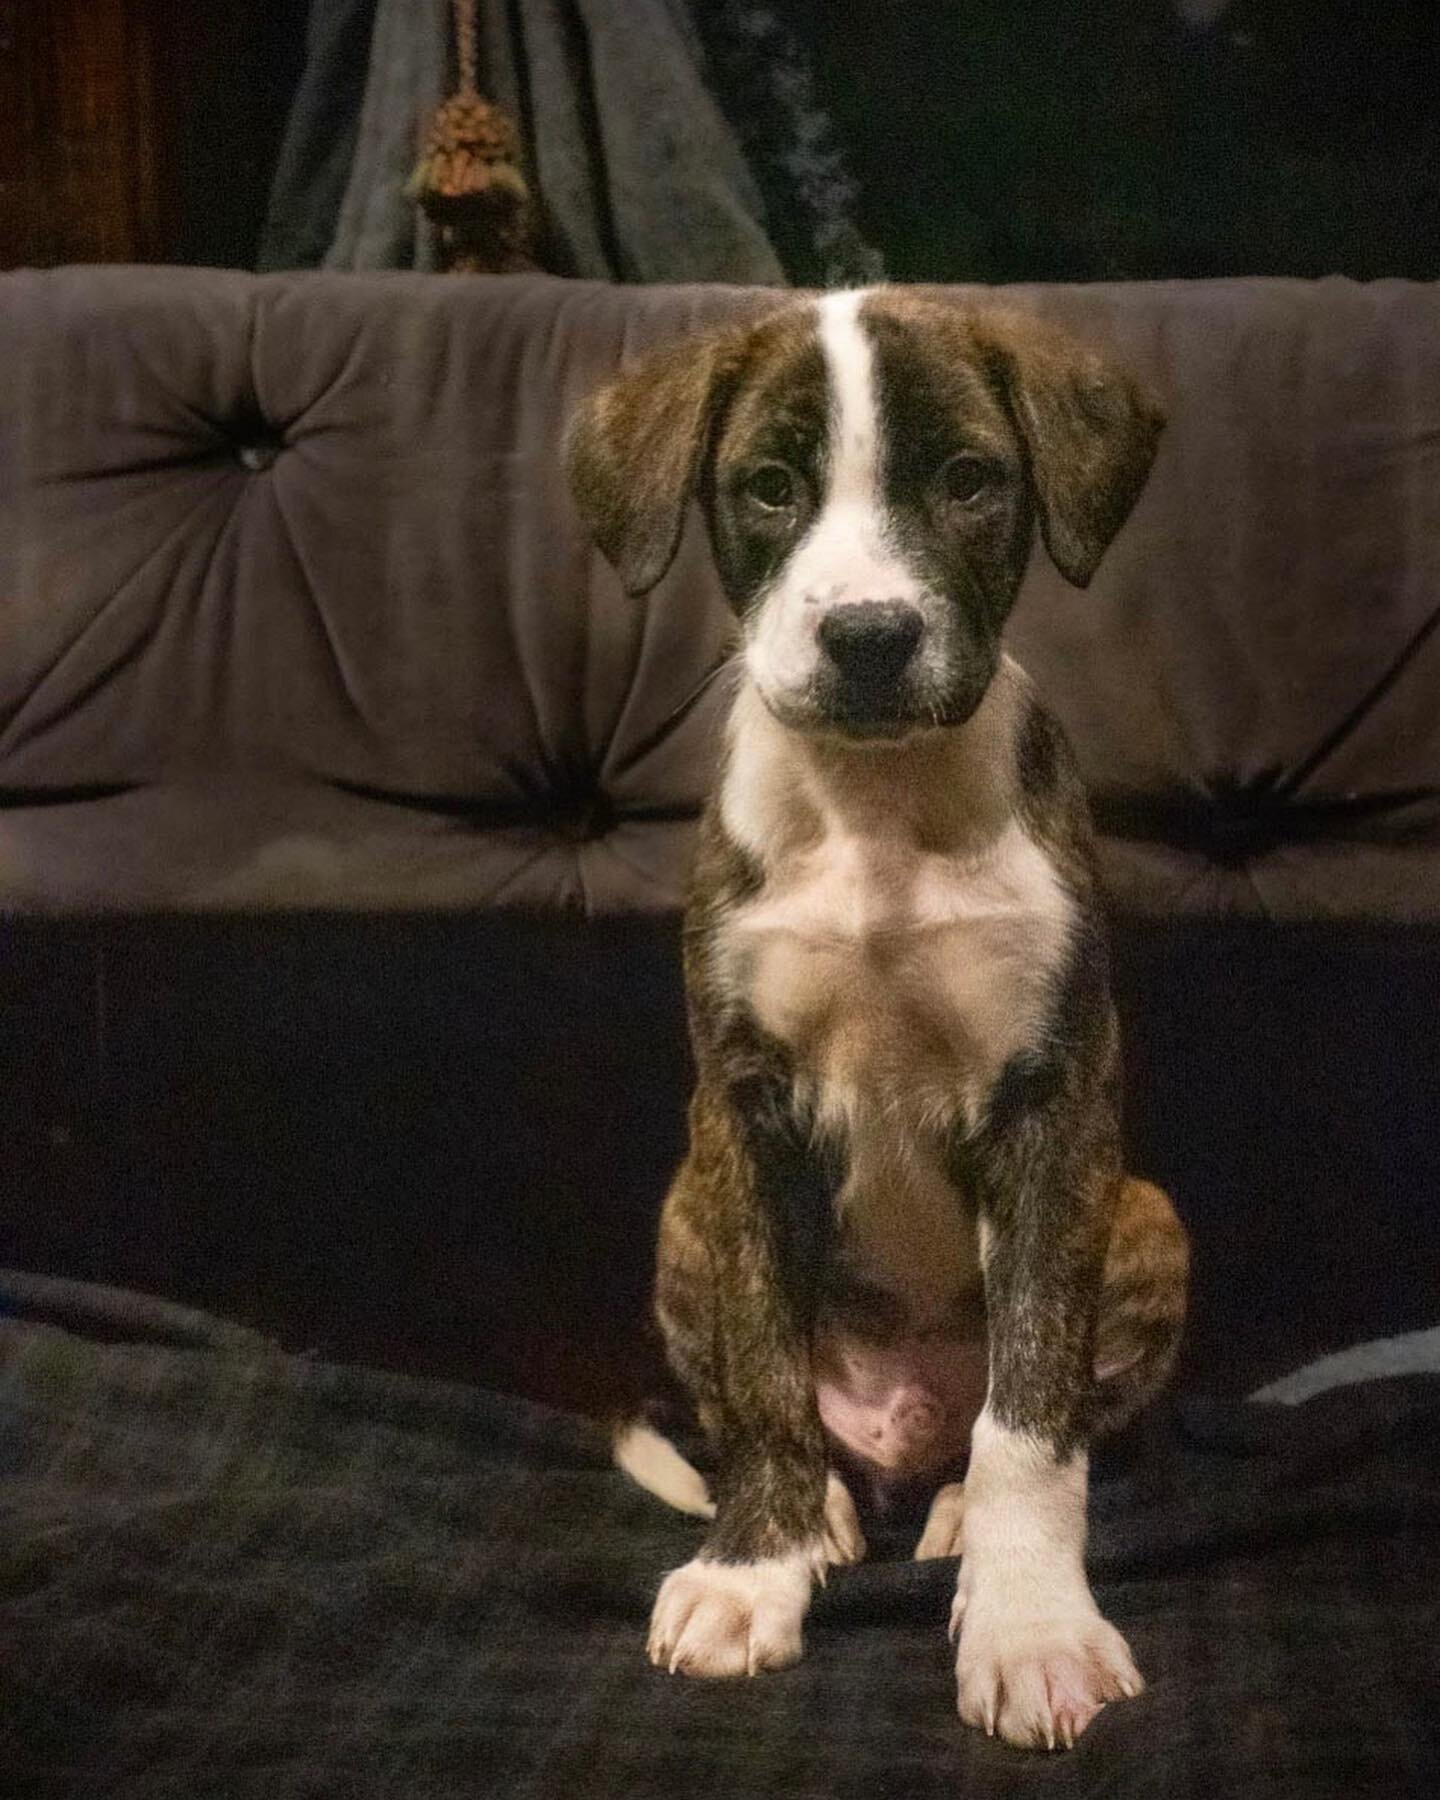 Meet Clayton!!!💙

This delightful 3ish month old pup came here with his 4 siblings in the hopes of finding his forever family!
He&rsquo;s learning fast, loves other dogs, kids and long romps in the yard.
He&rsquo;s a hound mix and will be a medium s